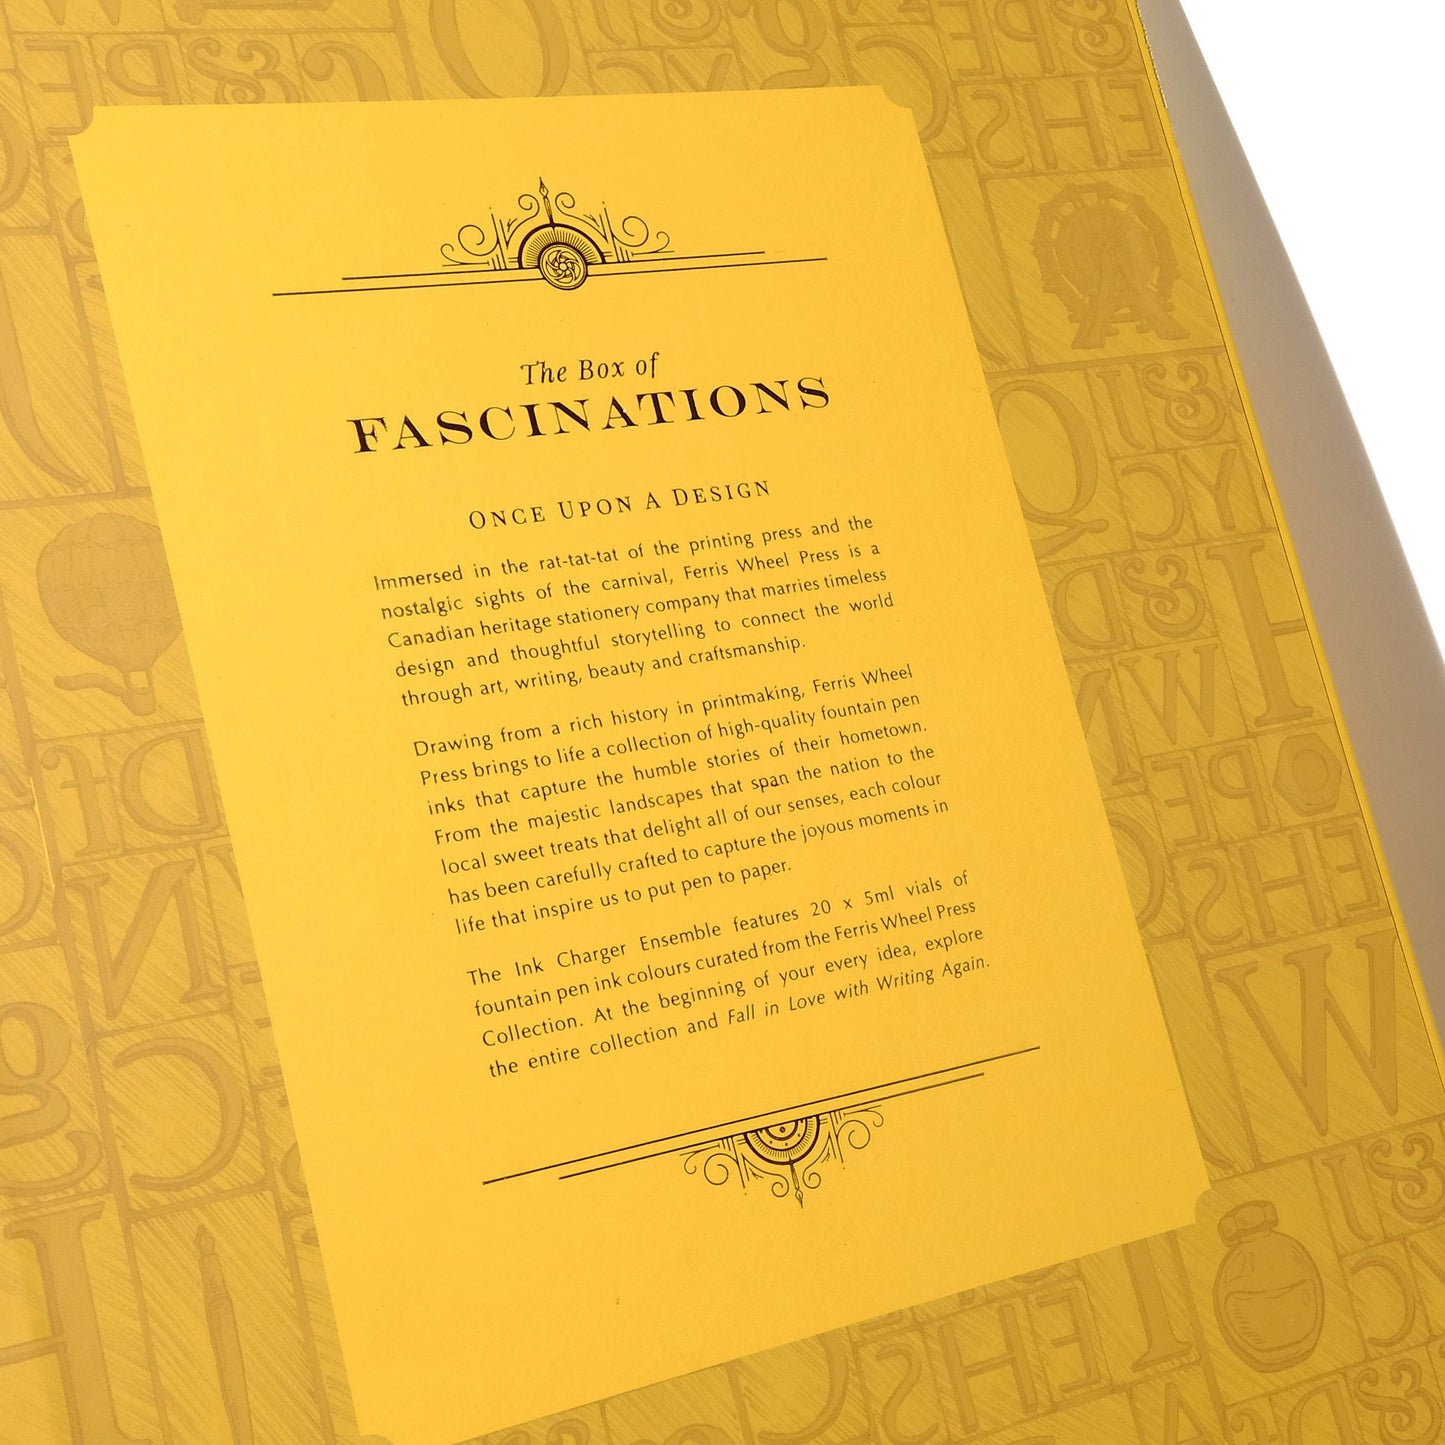 The Box of Fascinations - Vol. 1